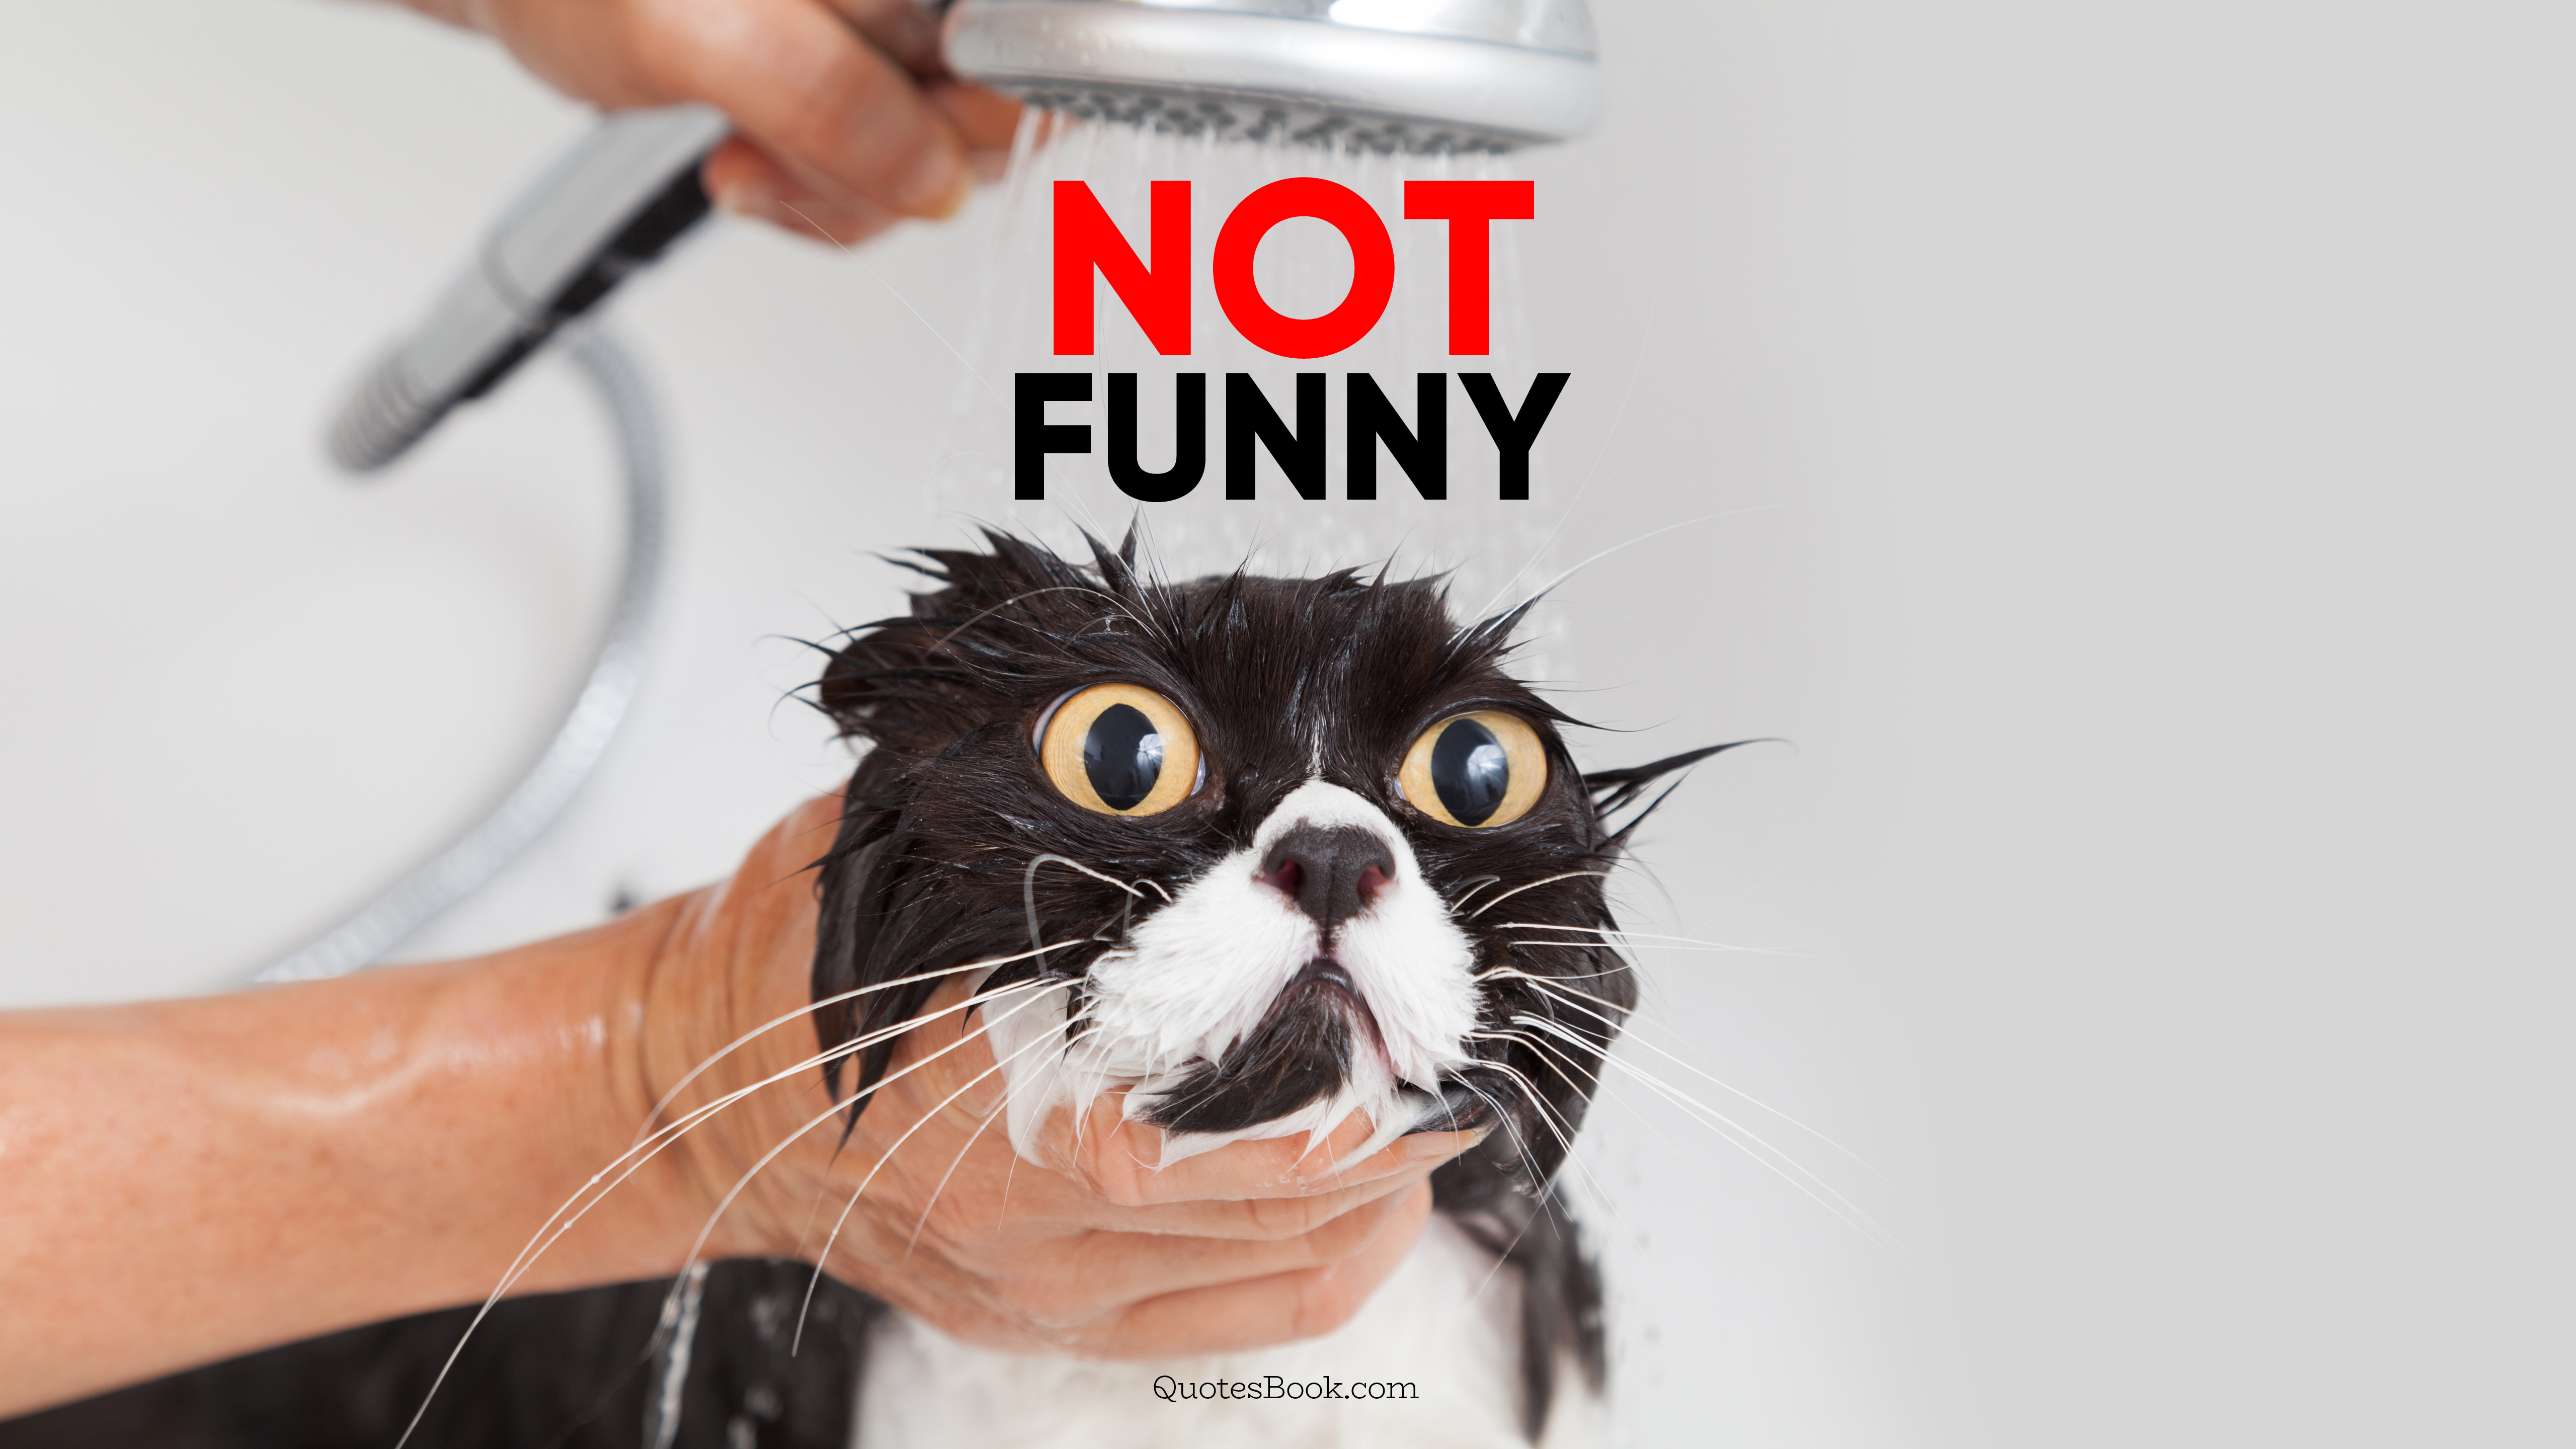 Not funny - QuotesBook